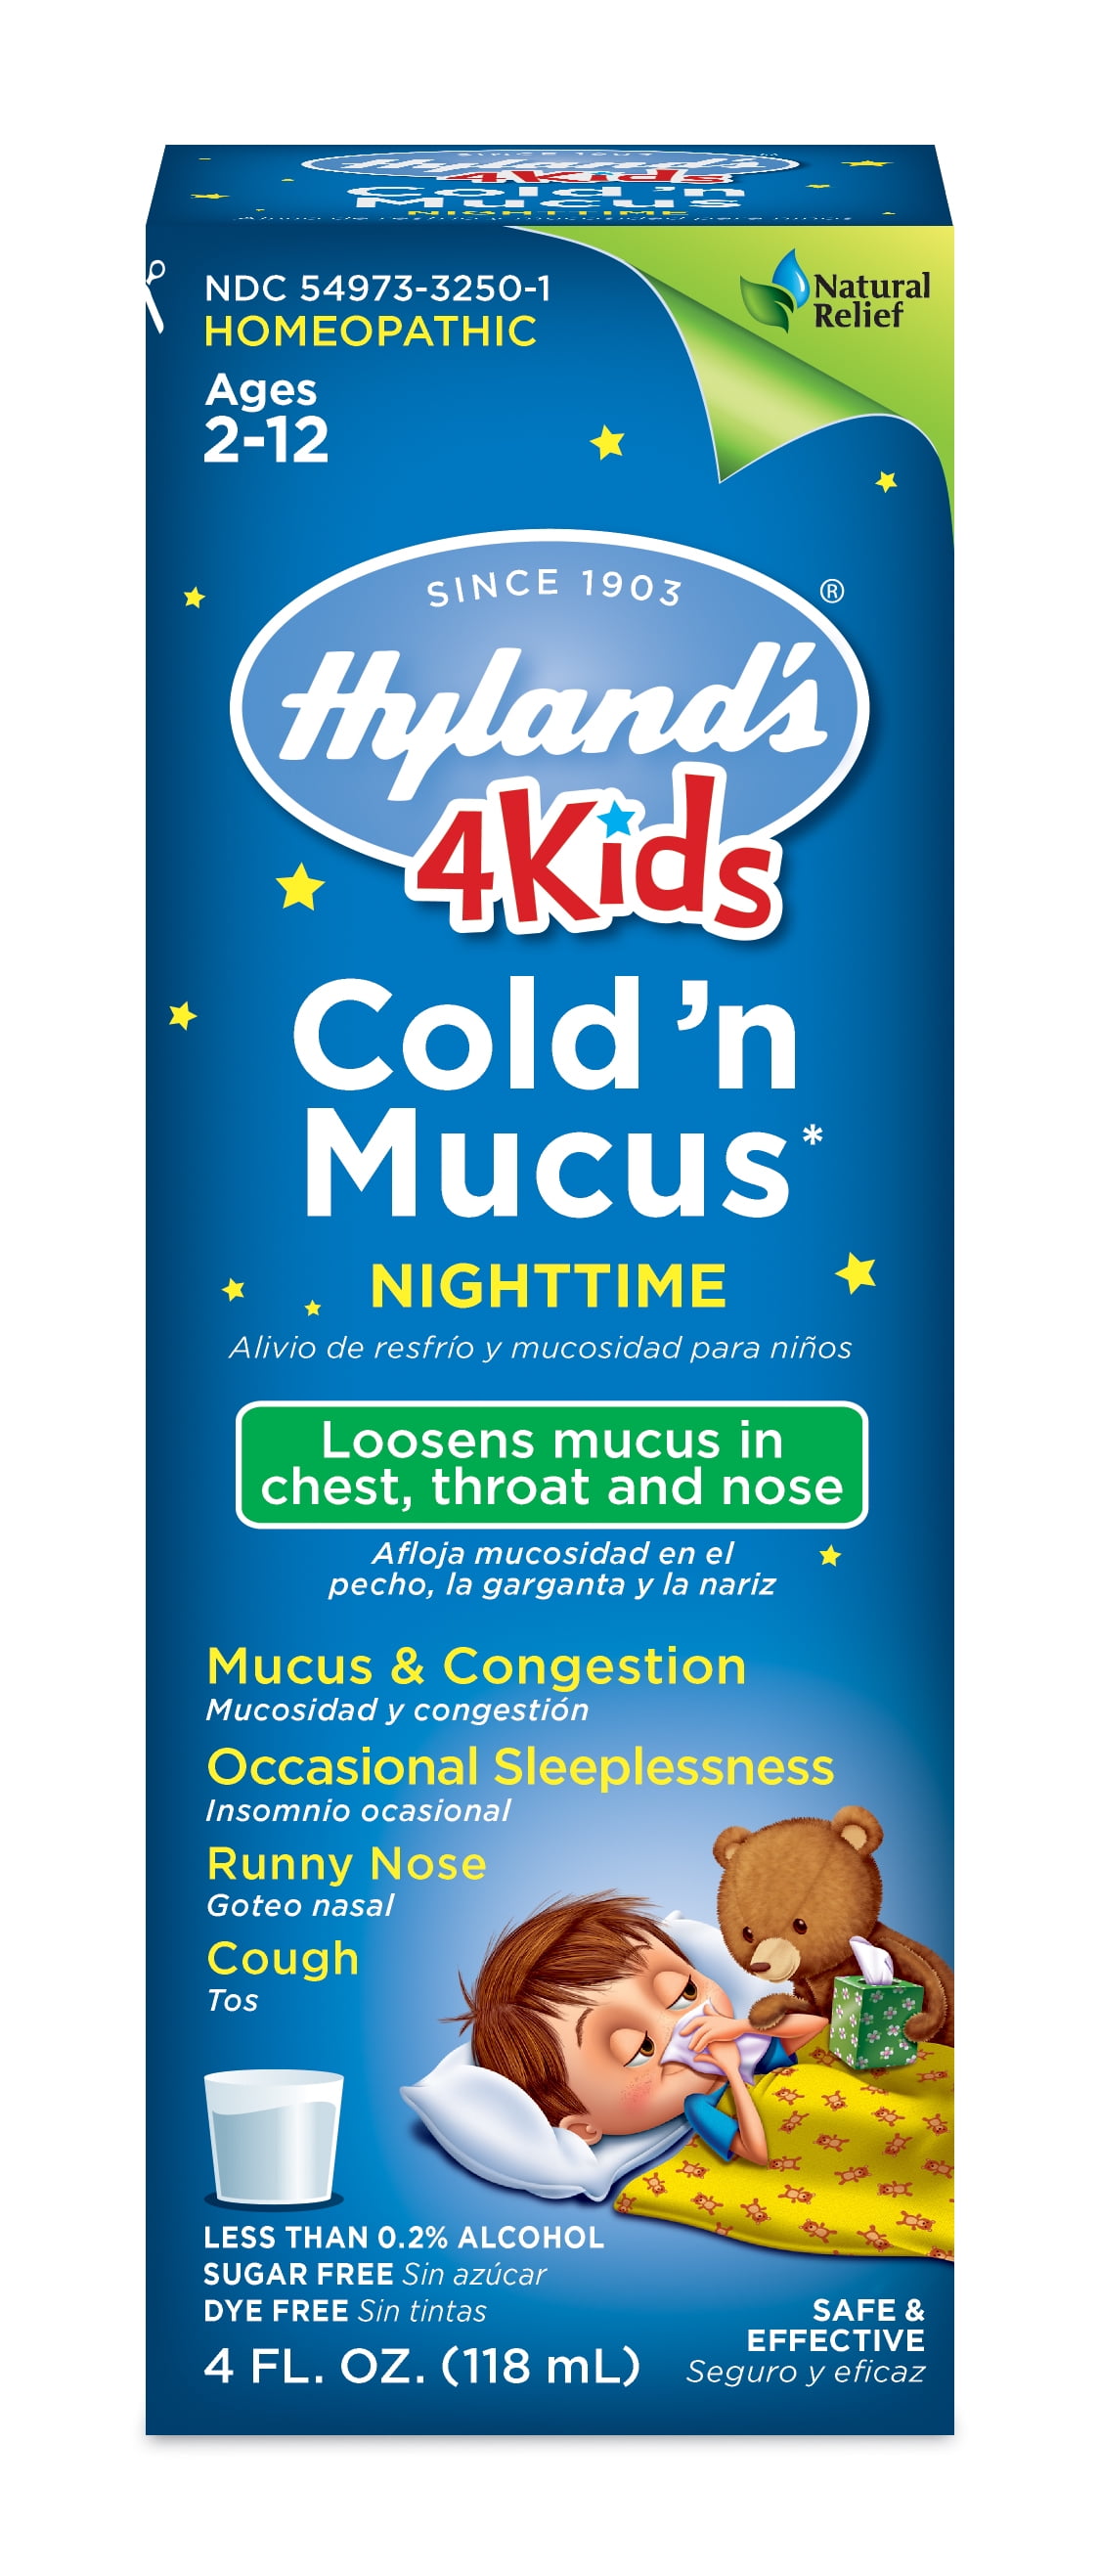 Hyland's 4 Kids Cold 'n Mucus Nighttime Relief Liquid, Natural Relief of  Chest Congestion, Sleeplessness, Runny Nose, Sore Throat, Sneezing, Cough,  4 ...